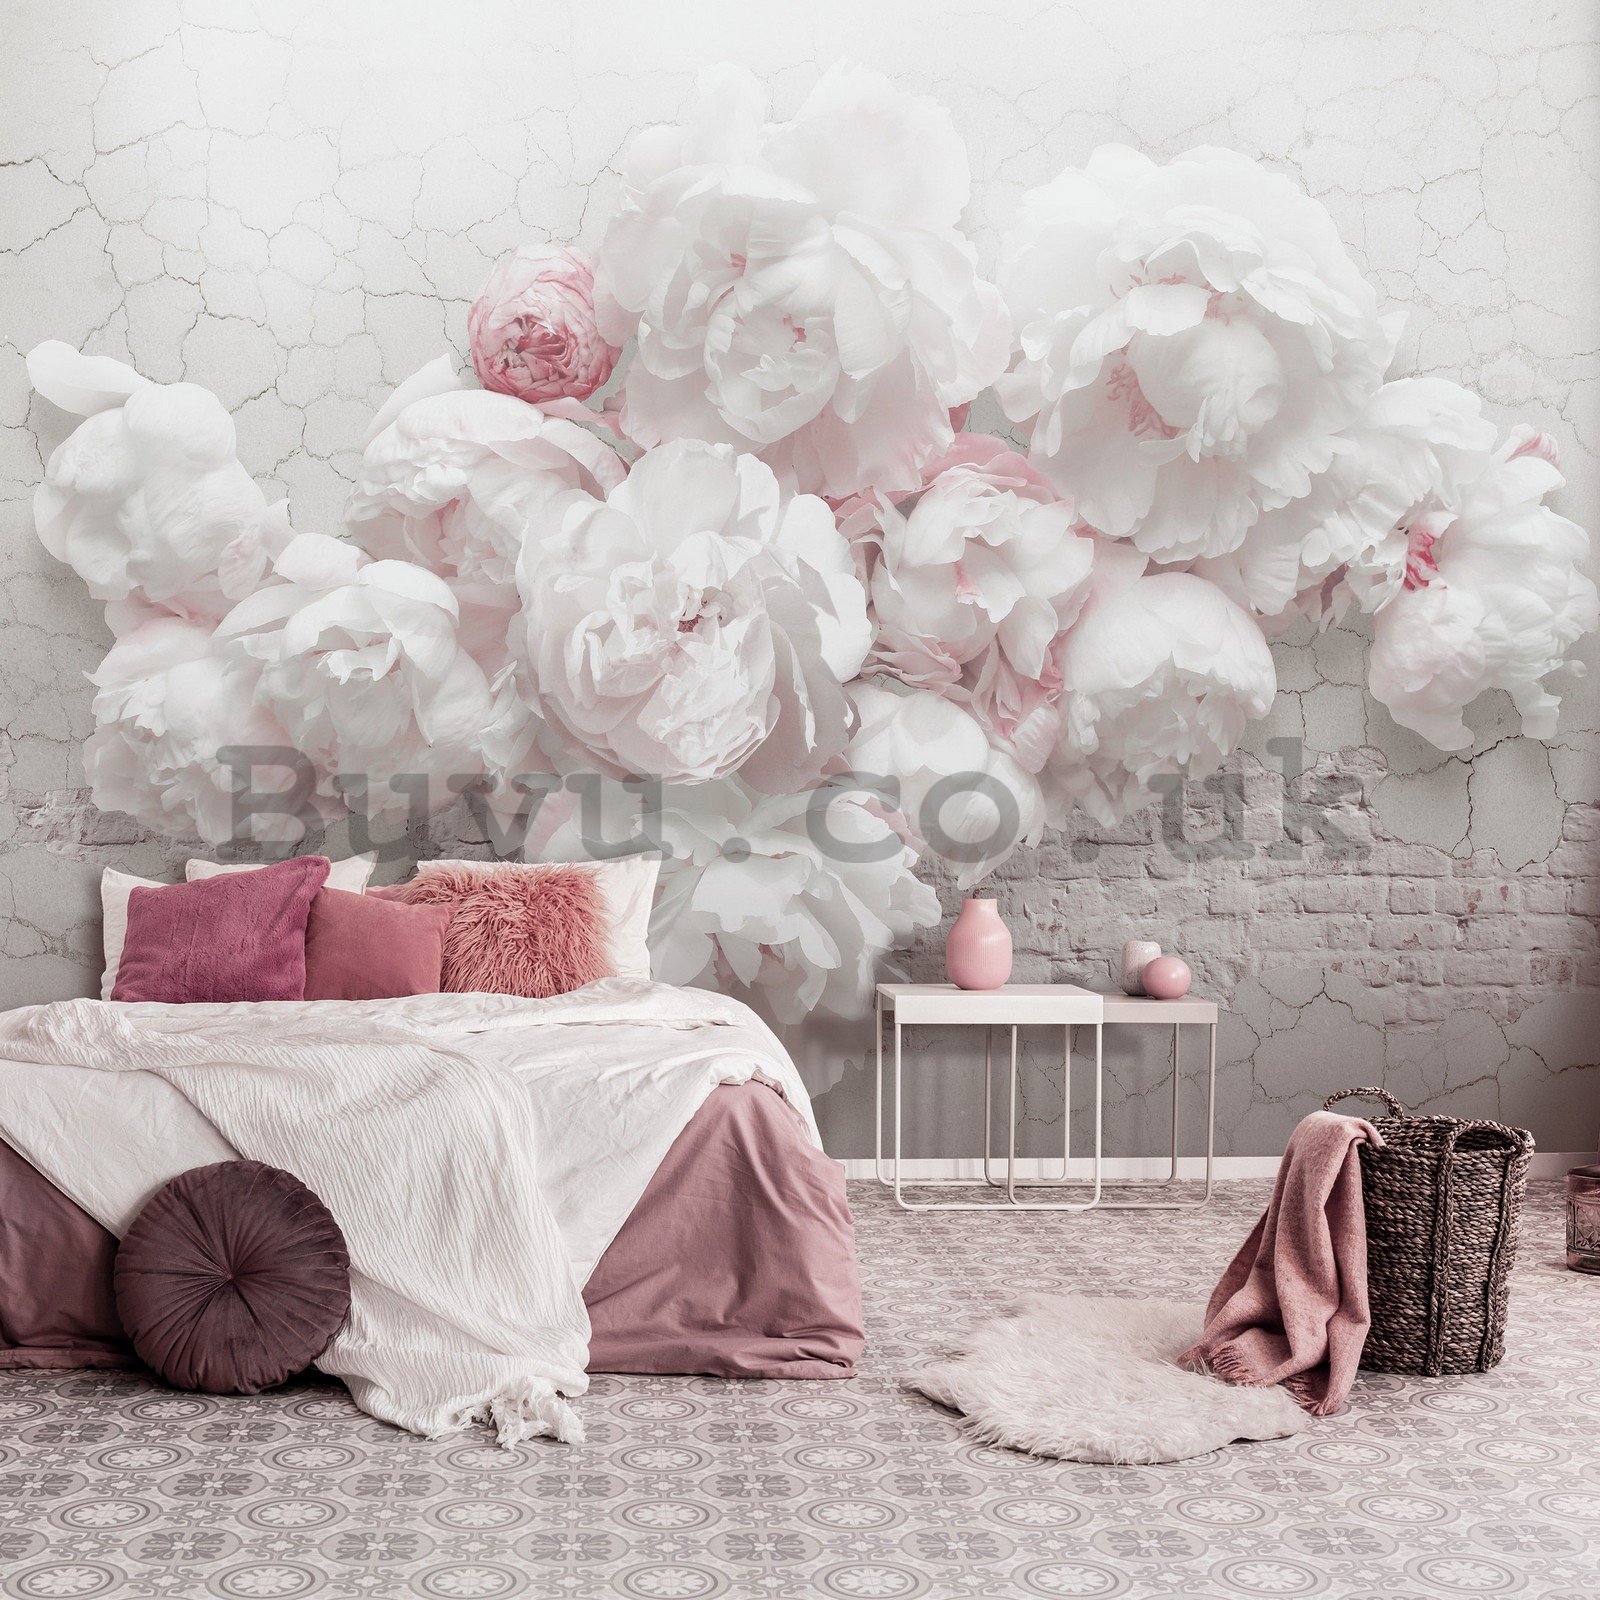 Wall mural vlies: White roses on the wall - 254x184 cm